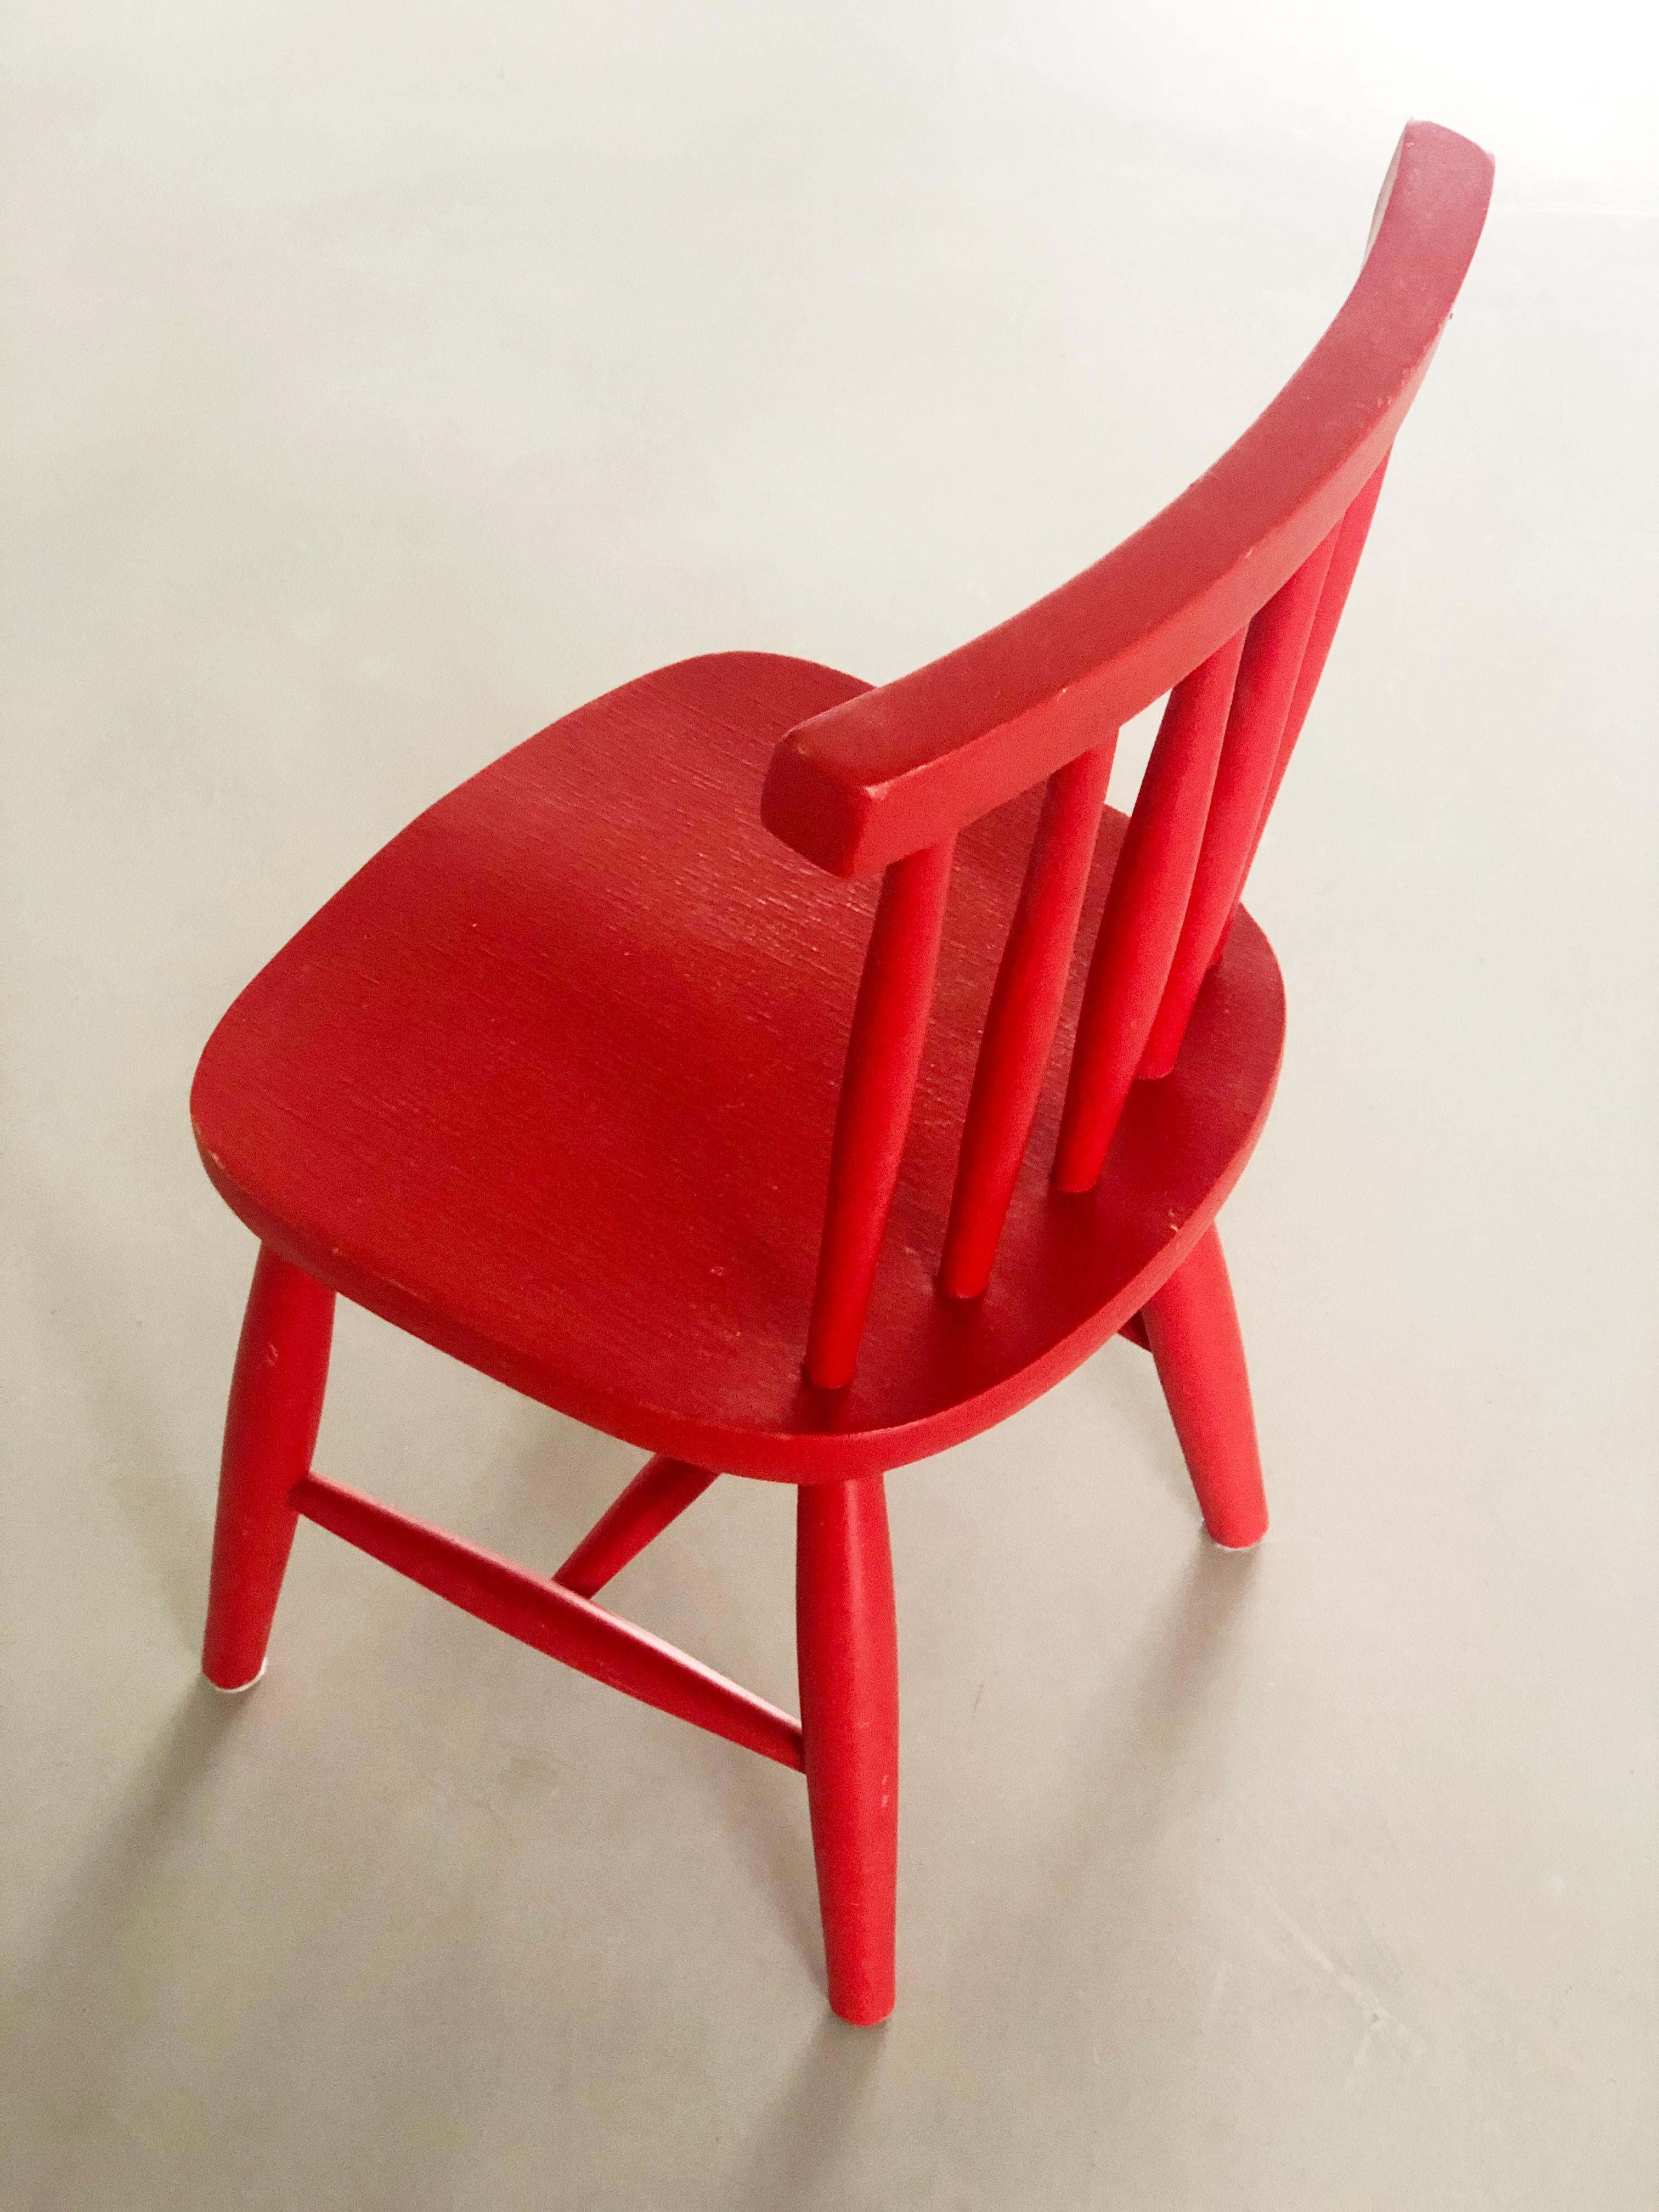 Scandinavian Modern Scandinavian Poul Volther style red wooden child chair 1960's For Sale